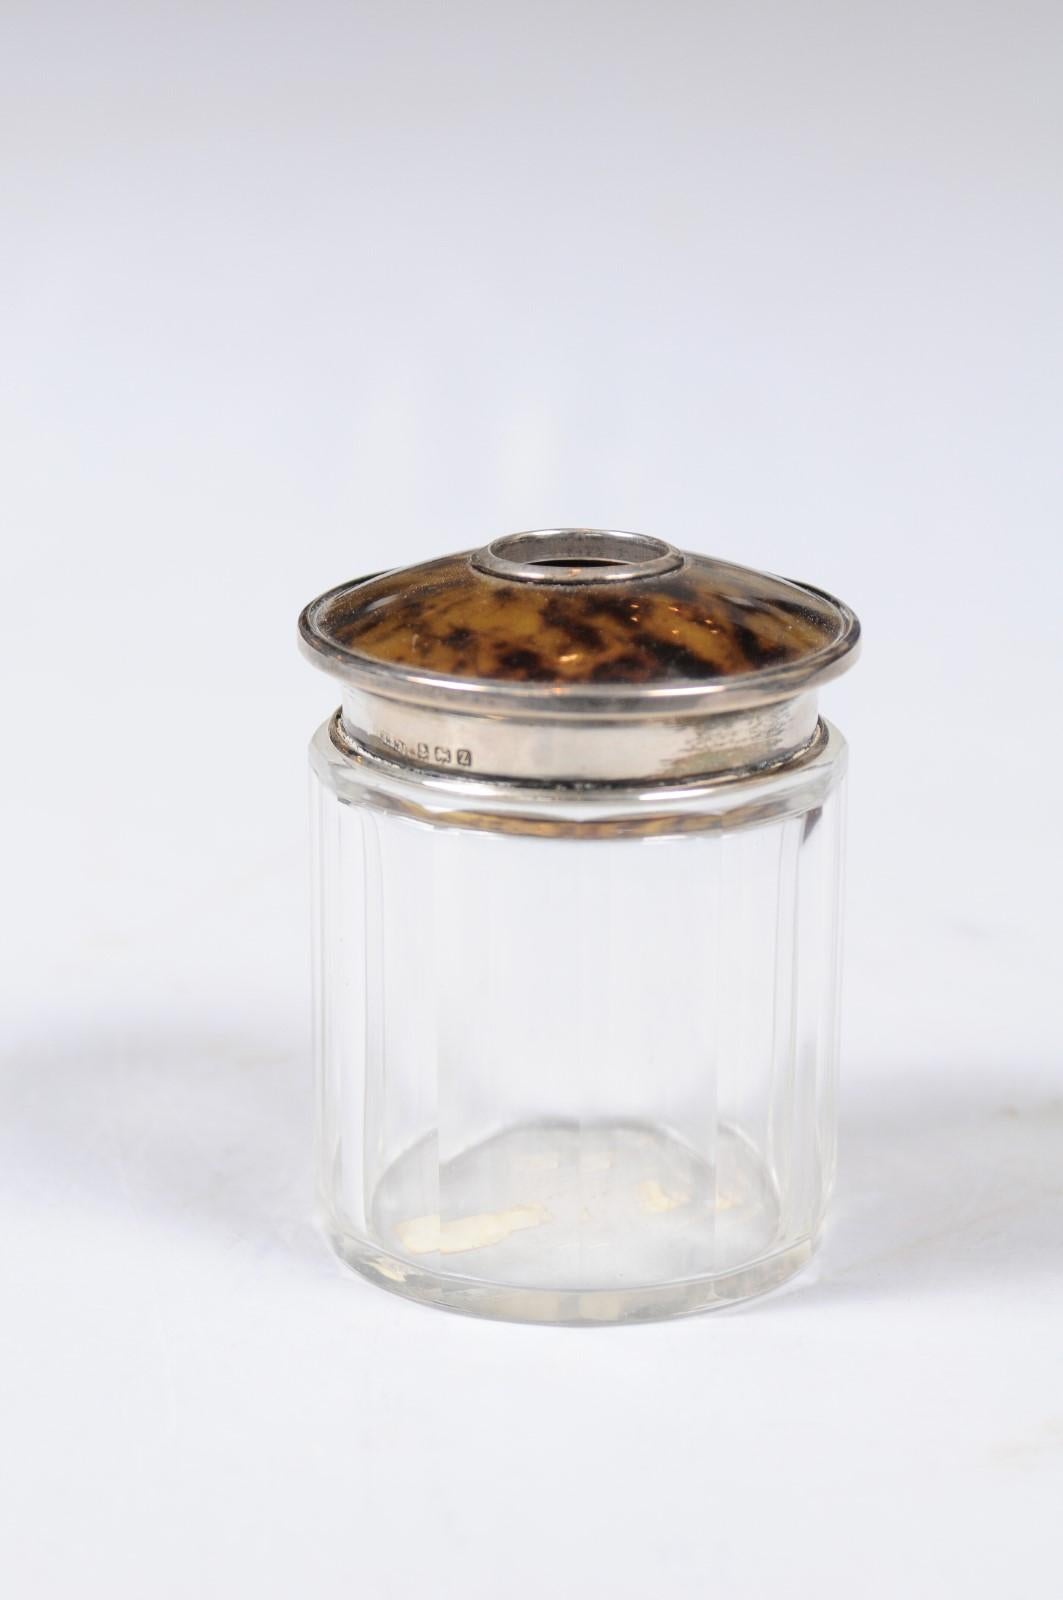 An English Edwardian period crystal toiletry bottle from the early 20th century with silver accents and conic lid. Born in England during the early years of the 20th century, this delicate toiletry bottle features a crystal body of cylindrical